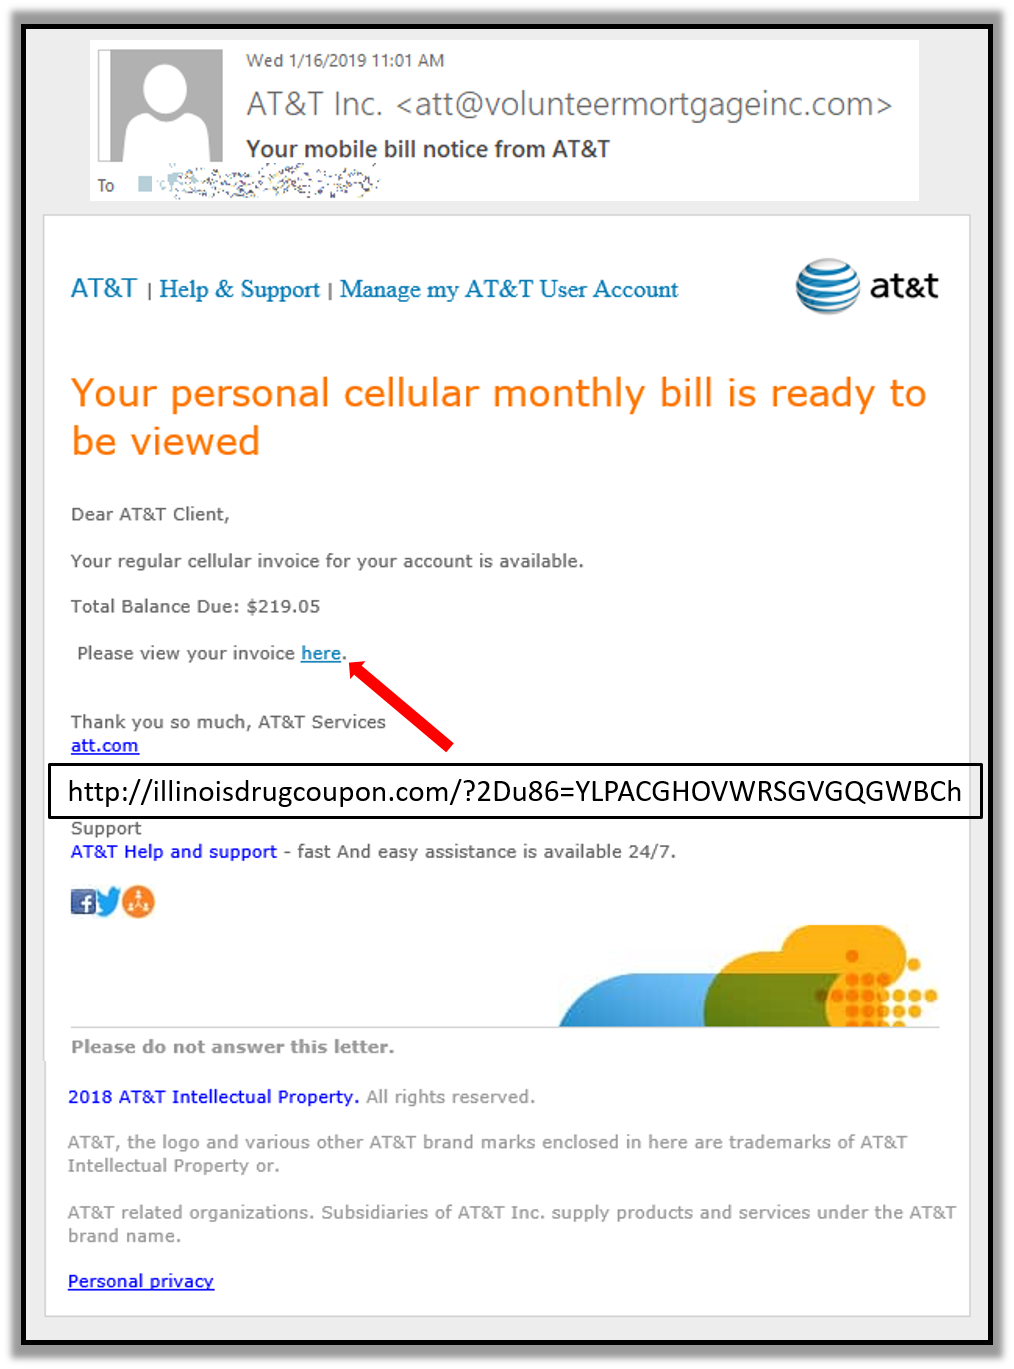 At&t live chat doesnt work